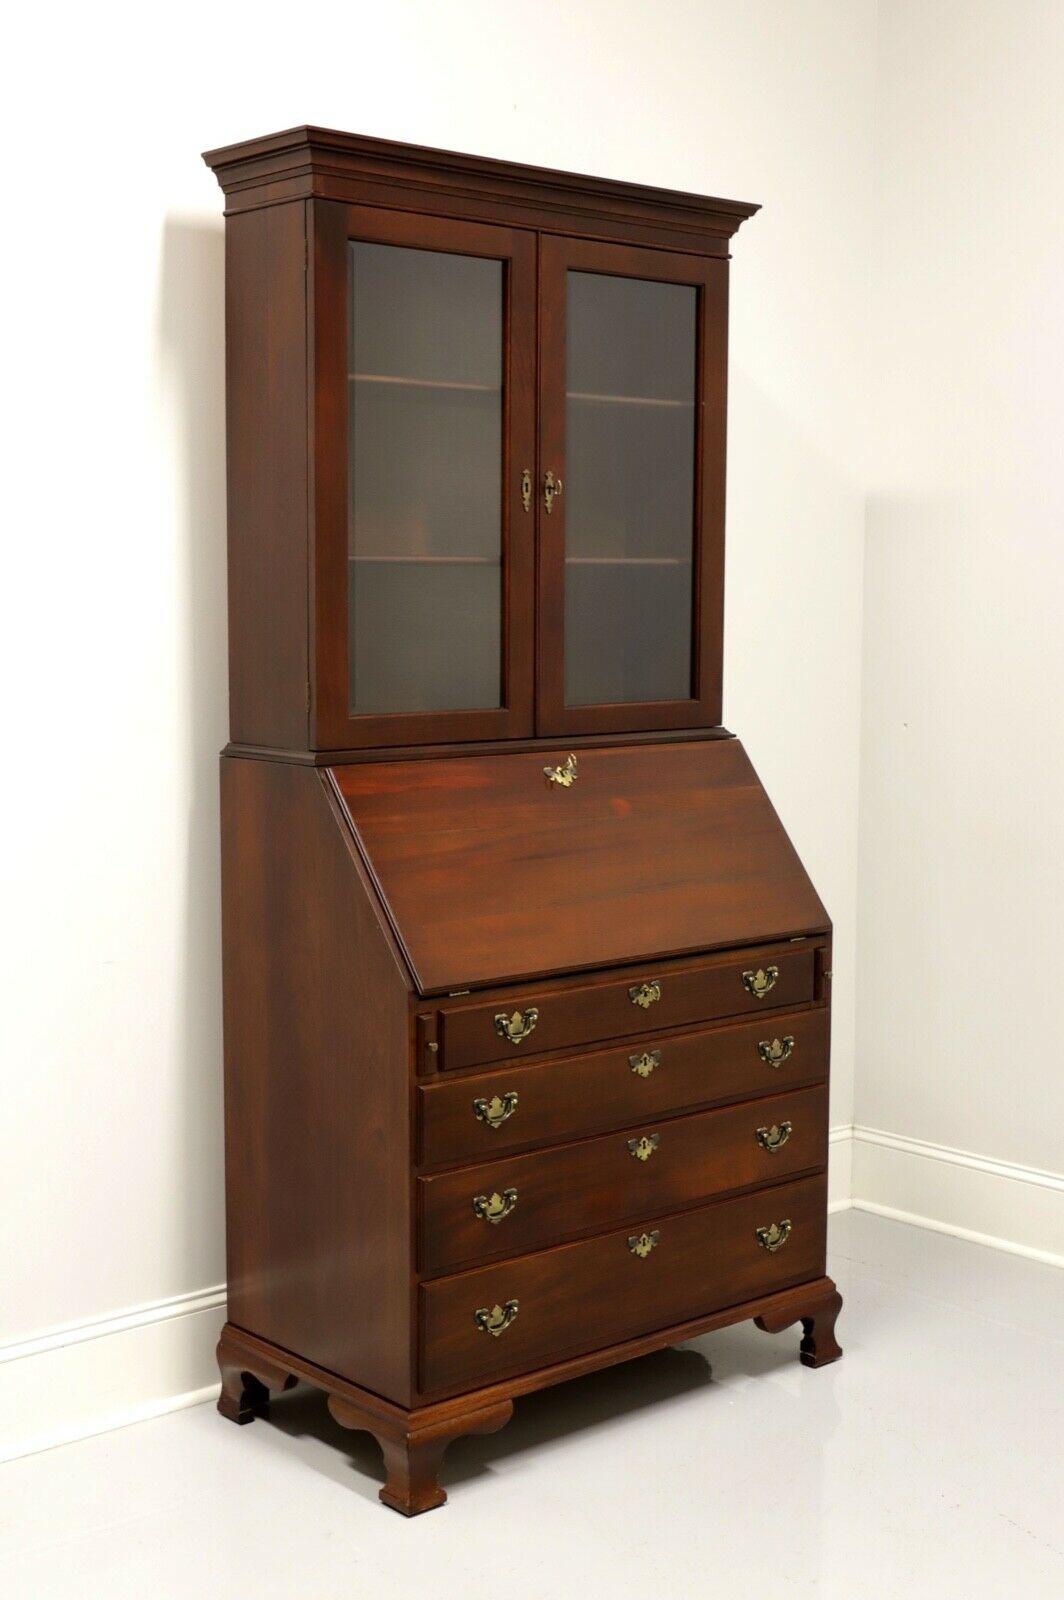 CRAFTIQUE Solid Mahogany Chippendale Style Secretary with Bookcase 11